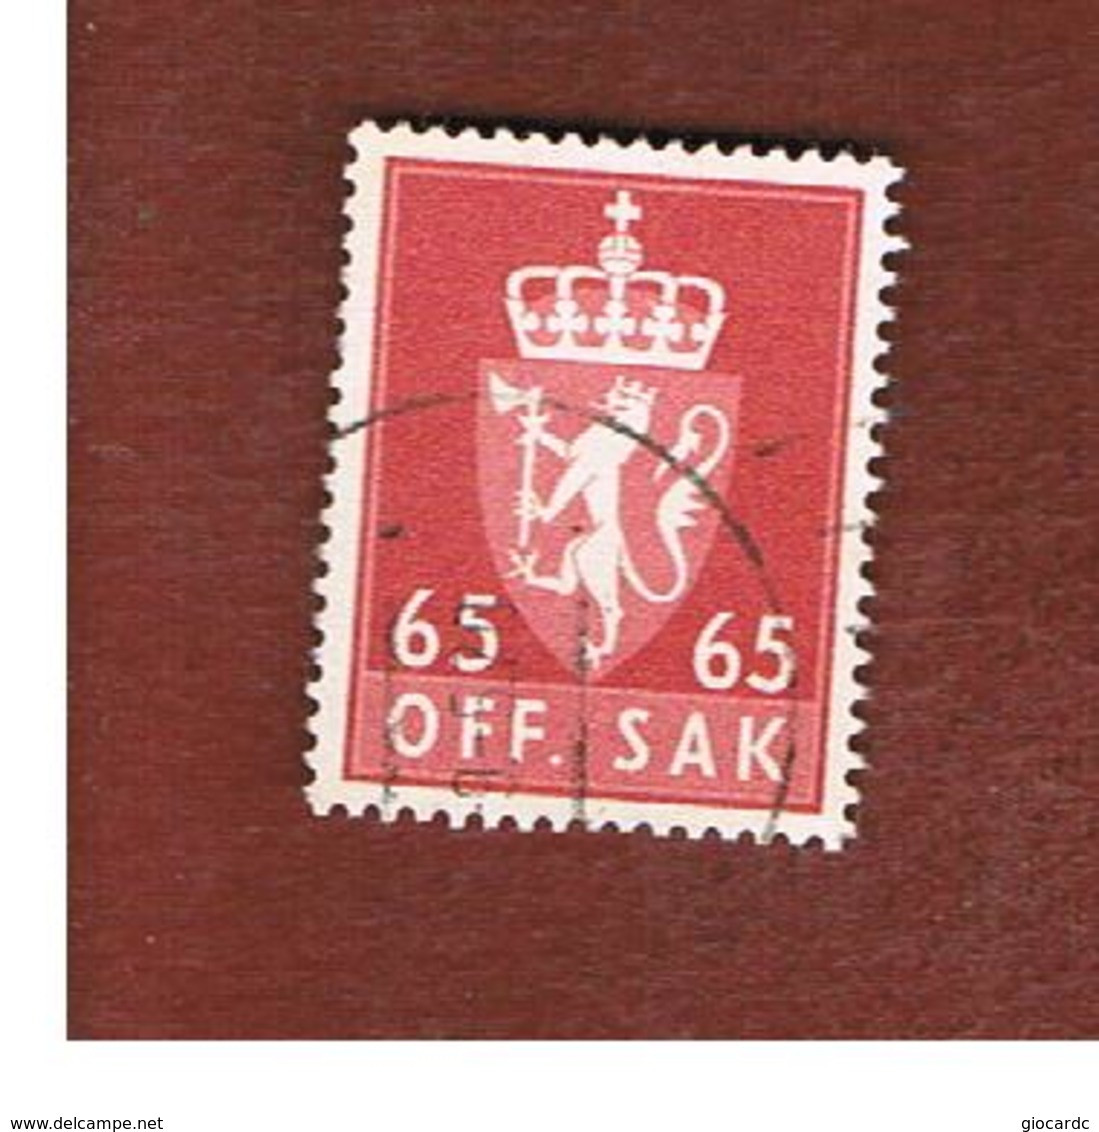 NORVEGIA (NORWAY) -   SG O475   -  1968  OFFICIAL STAMPS: ARM 65        - USED° - Oficiales